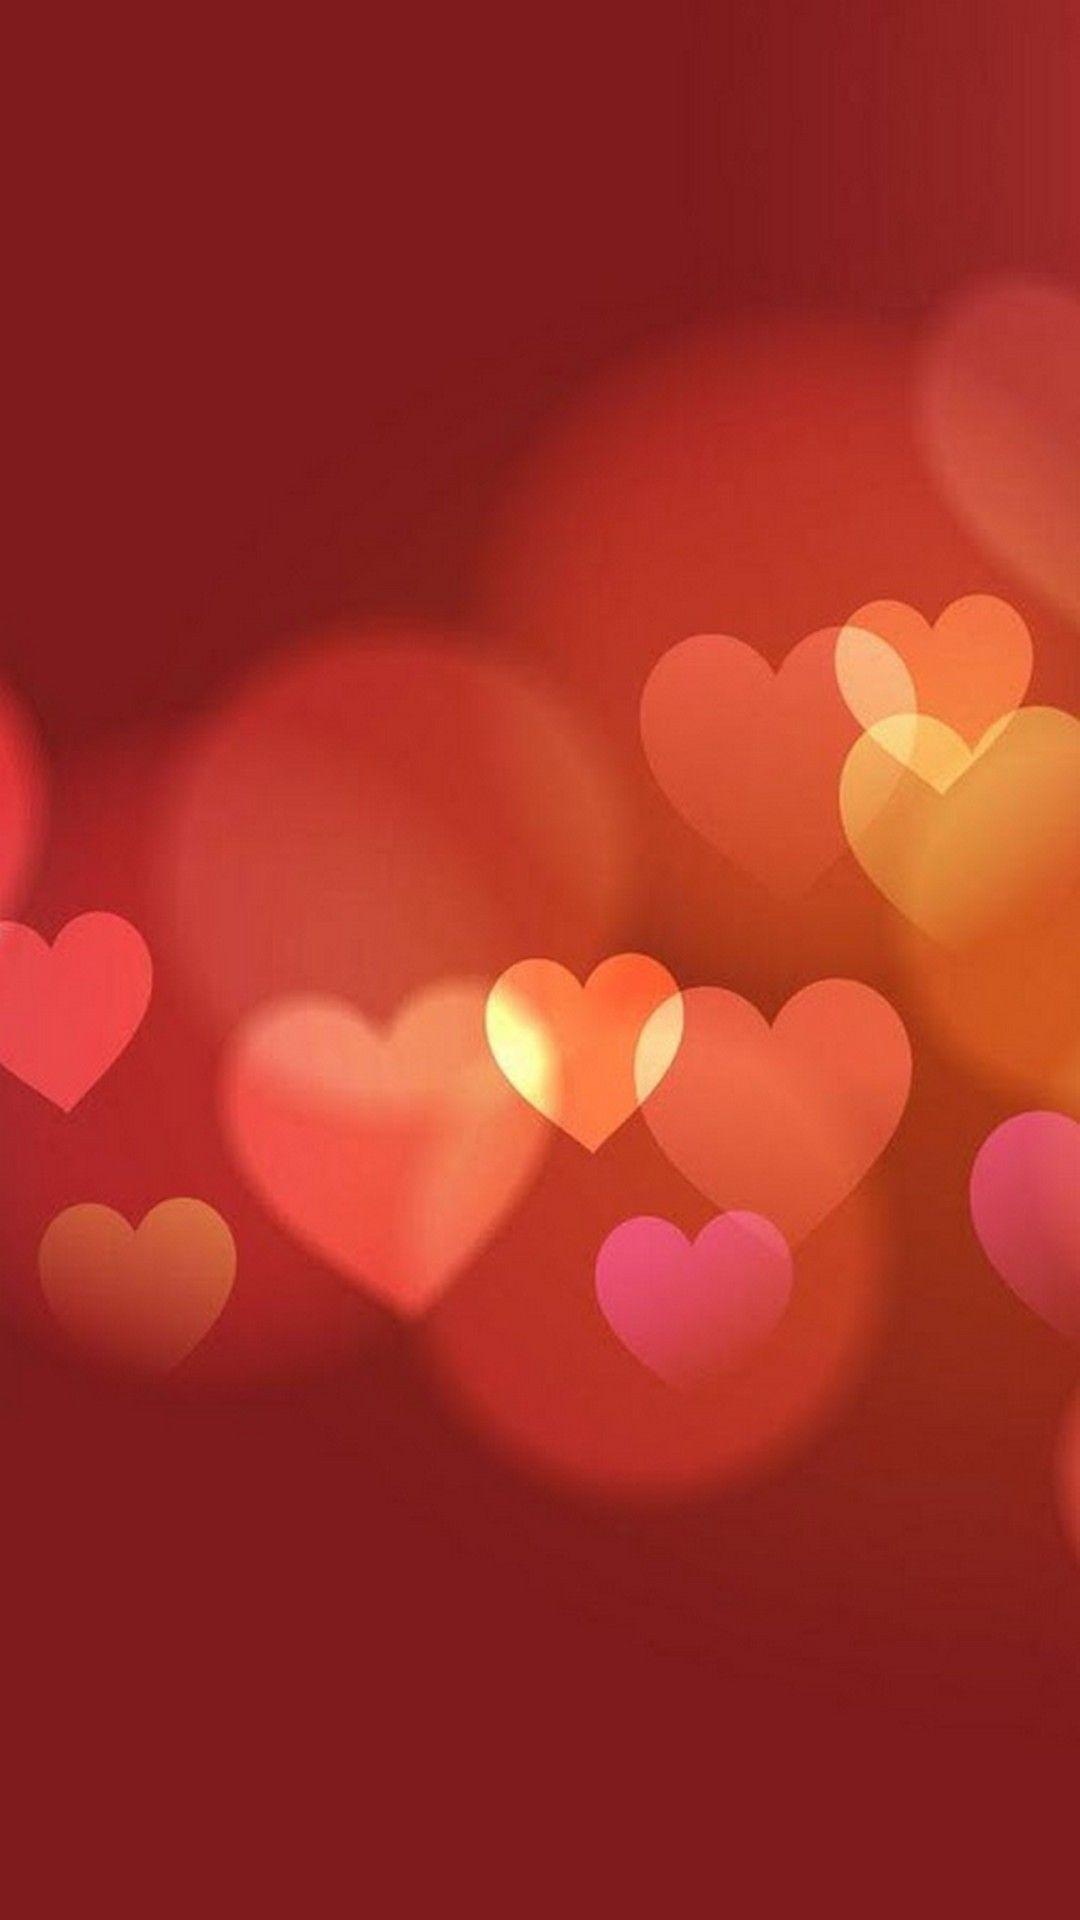 Cute Valentines Day Wallpaper iPhone. Heart iphone